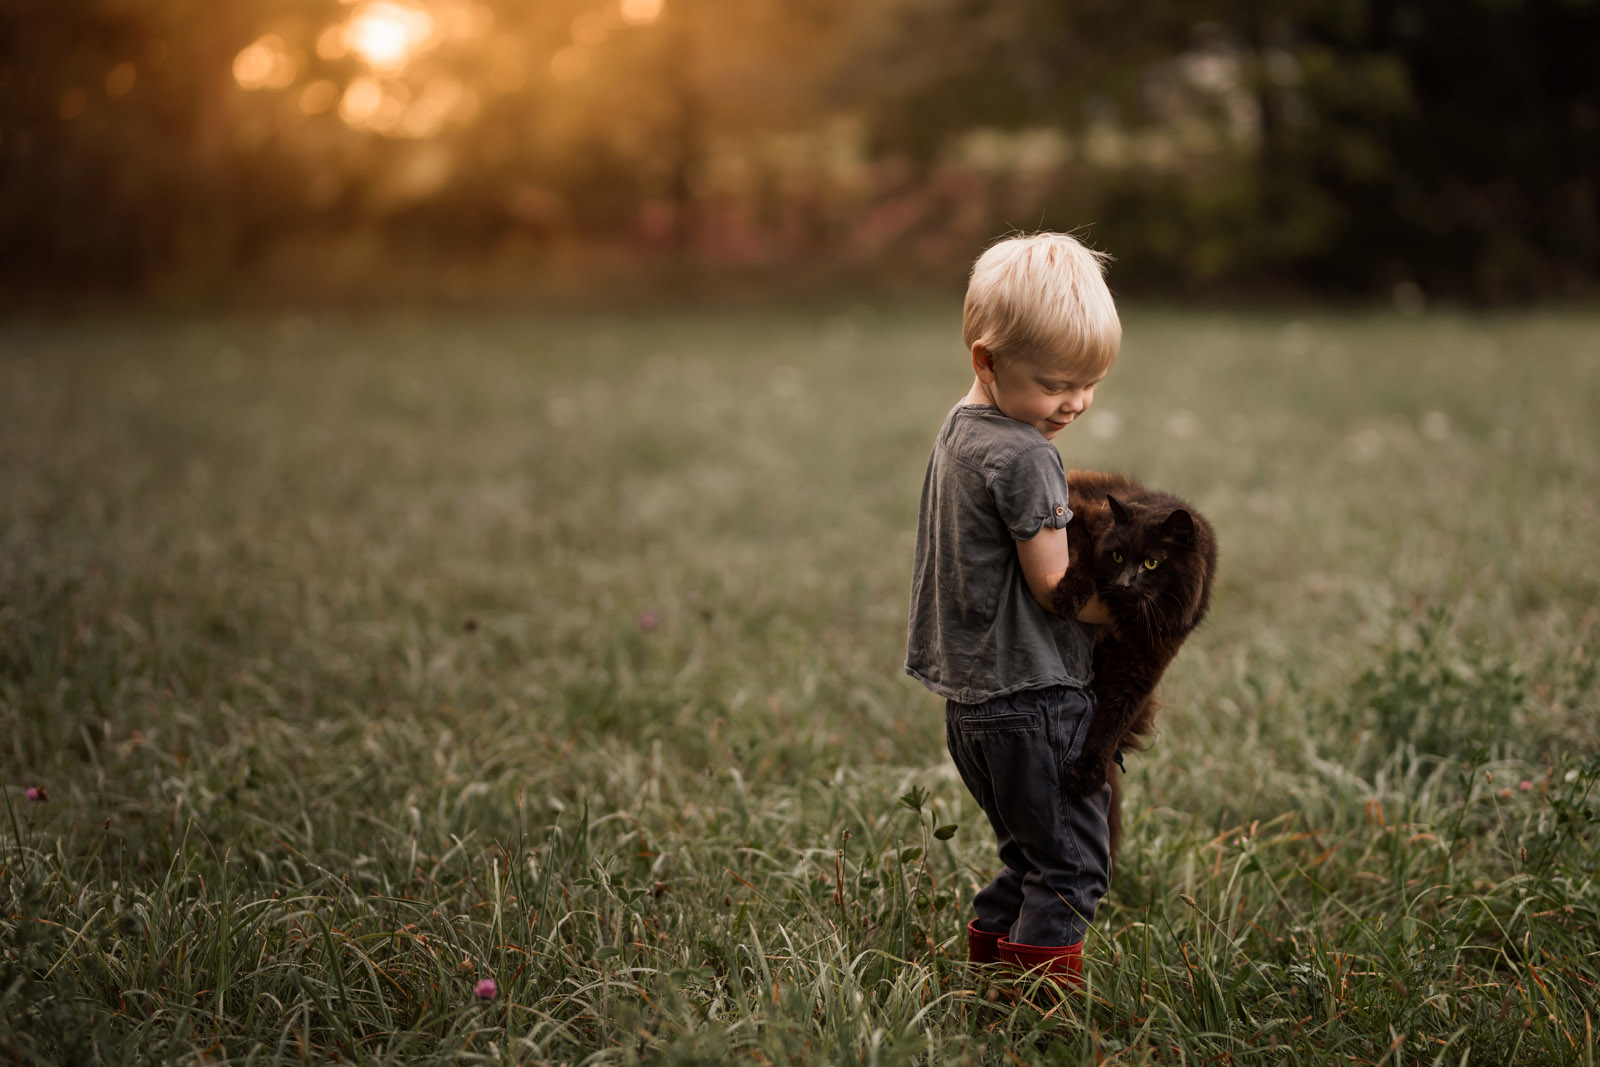 photographing pets small boy carrying large cat in grass by meg loeks